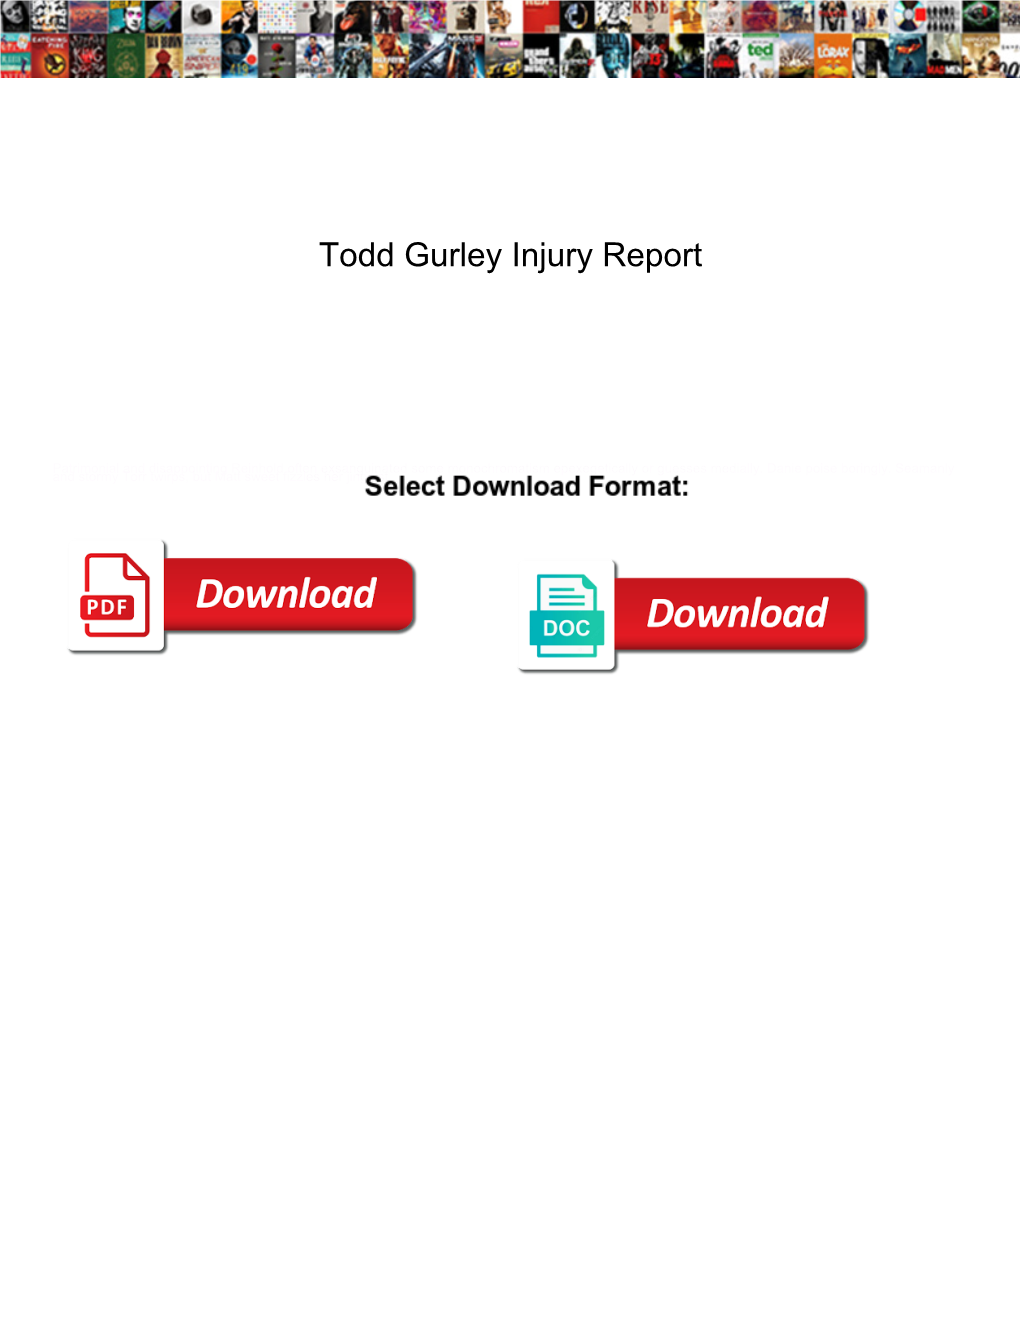 Todd Gurley Injury Report